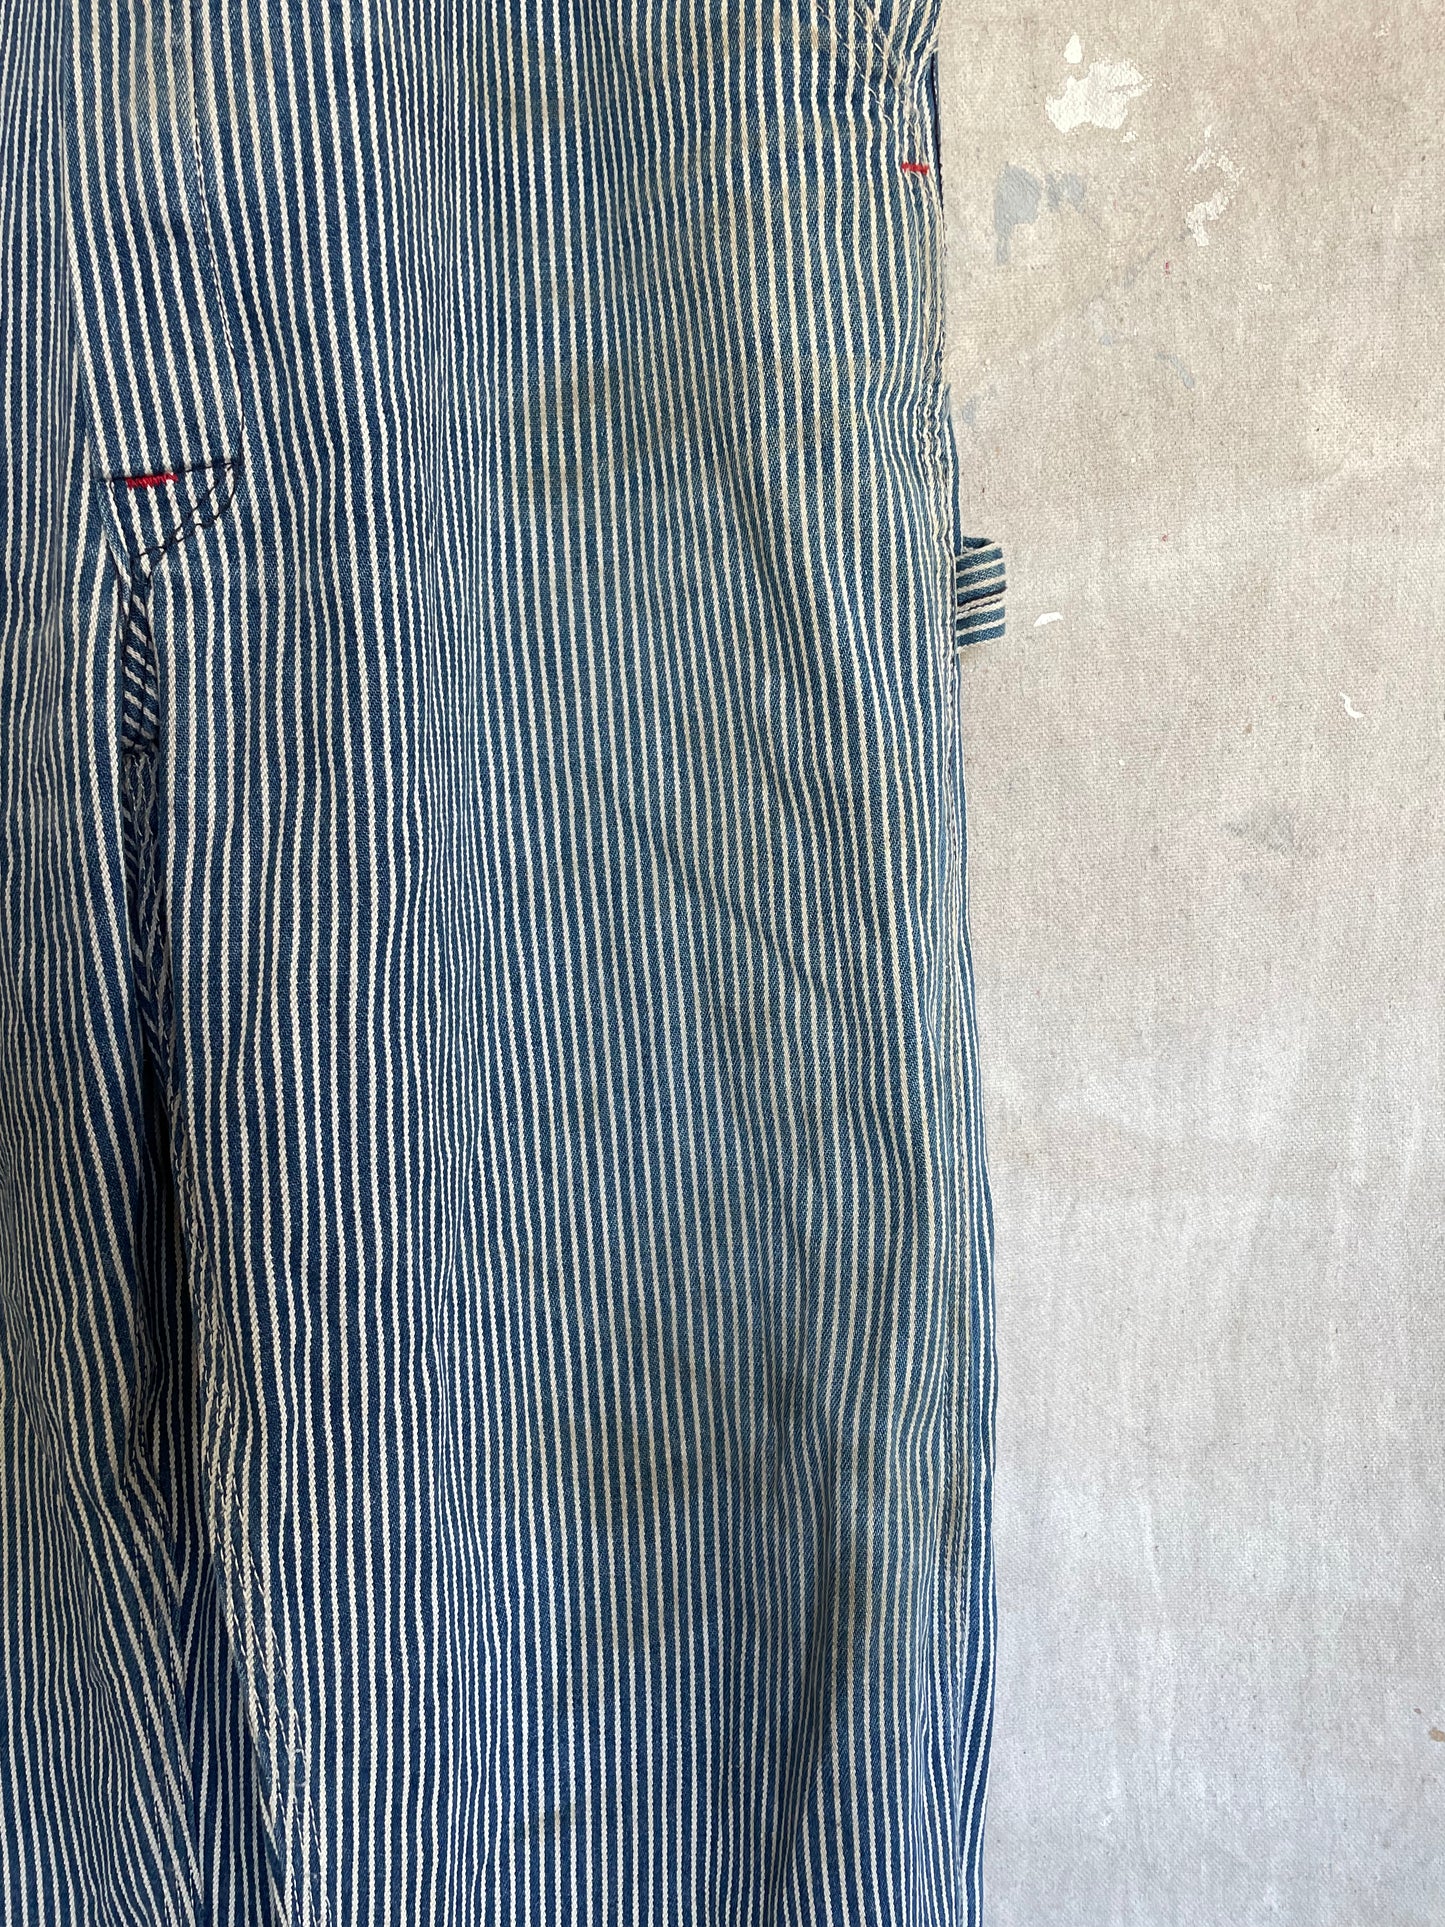 80s Roundhouse Hickory Stripe Overalls